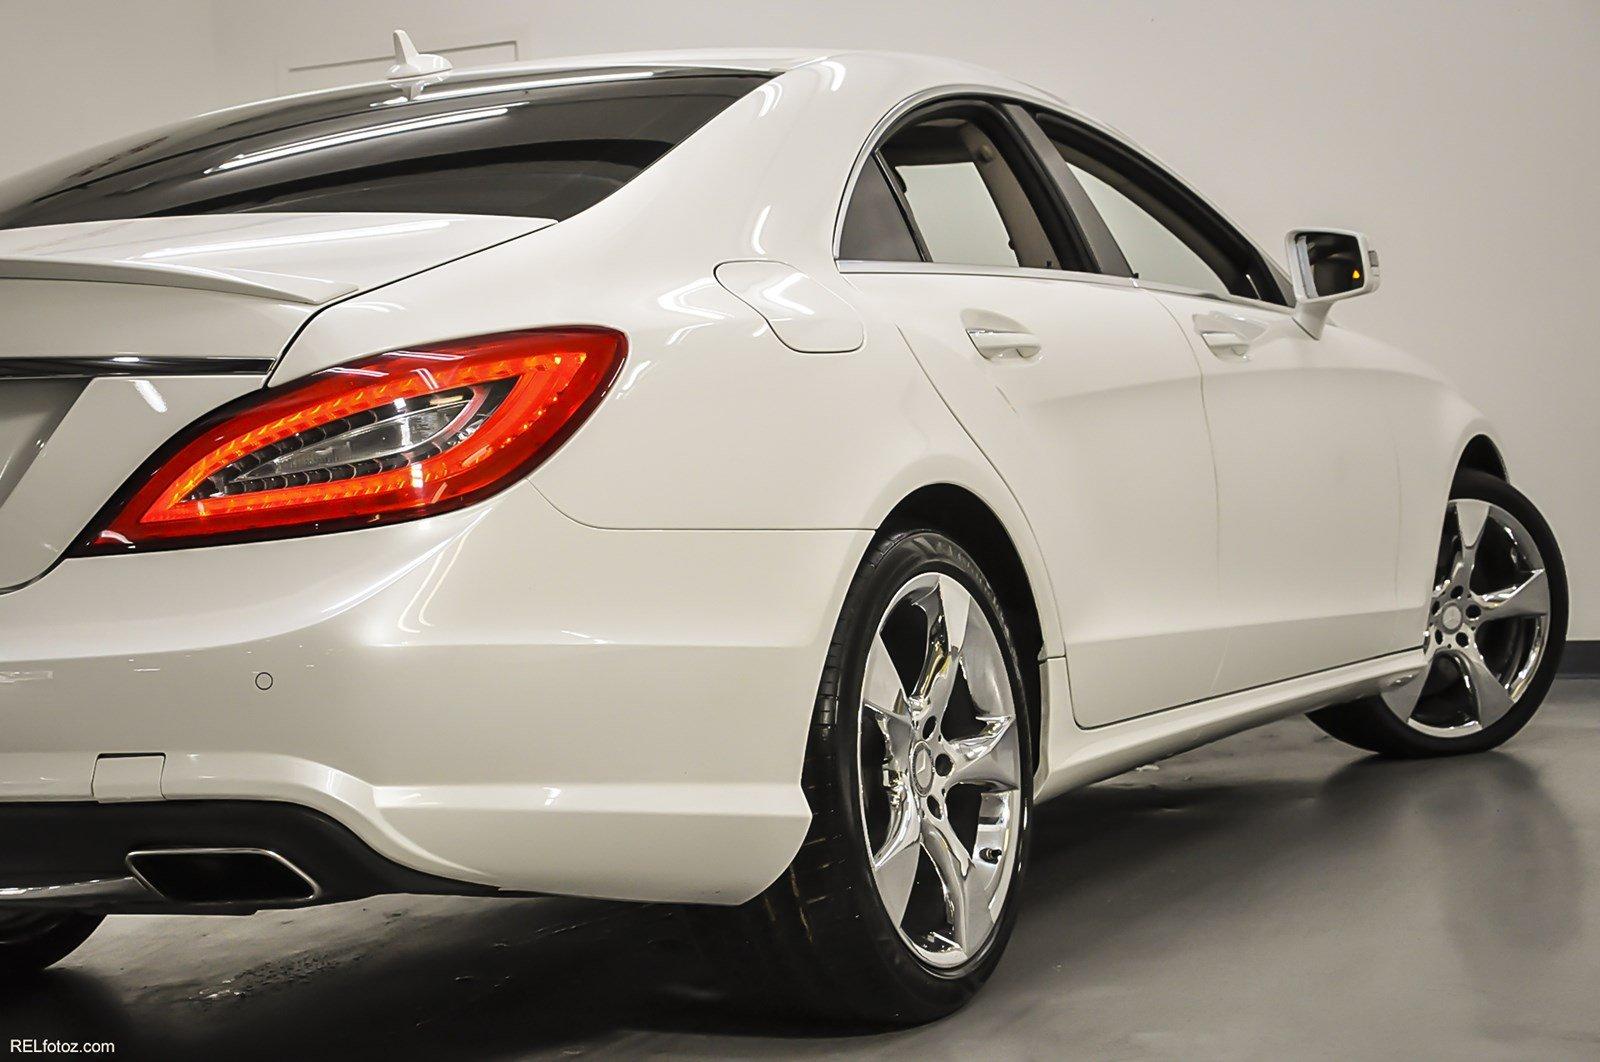 Used 2013 Mercedes-Benz CLS-Class CLS 550 for sale Sold at Gravity Autos Marietta in Marietta GA 30060 7